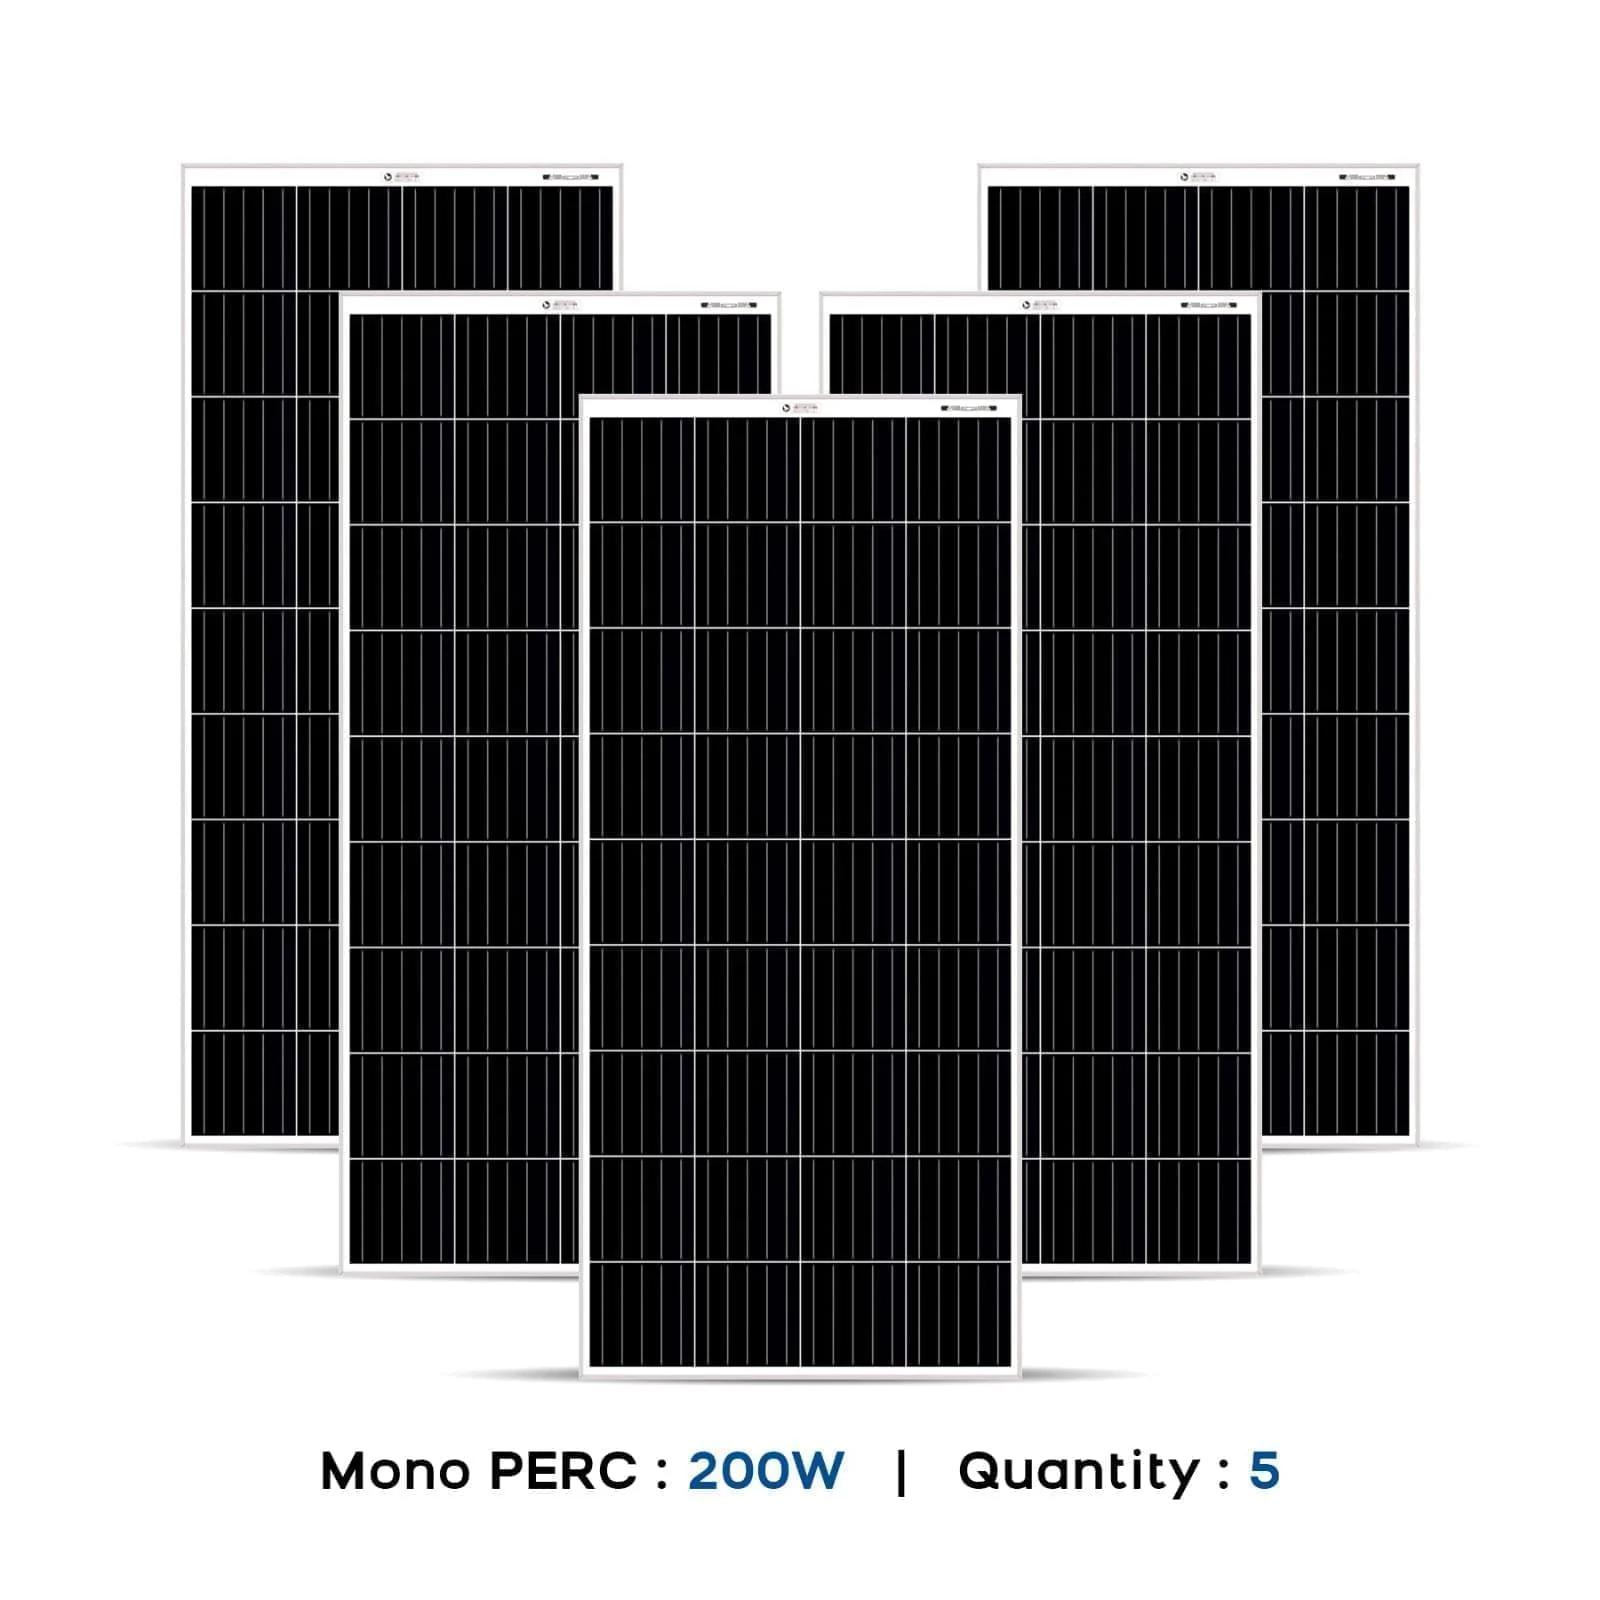 size of solar panels in mm - How large is a 1 kW solar panel